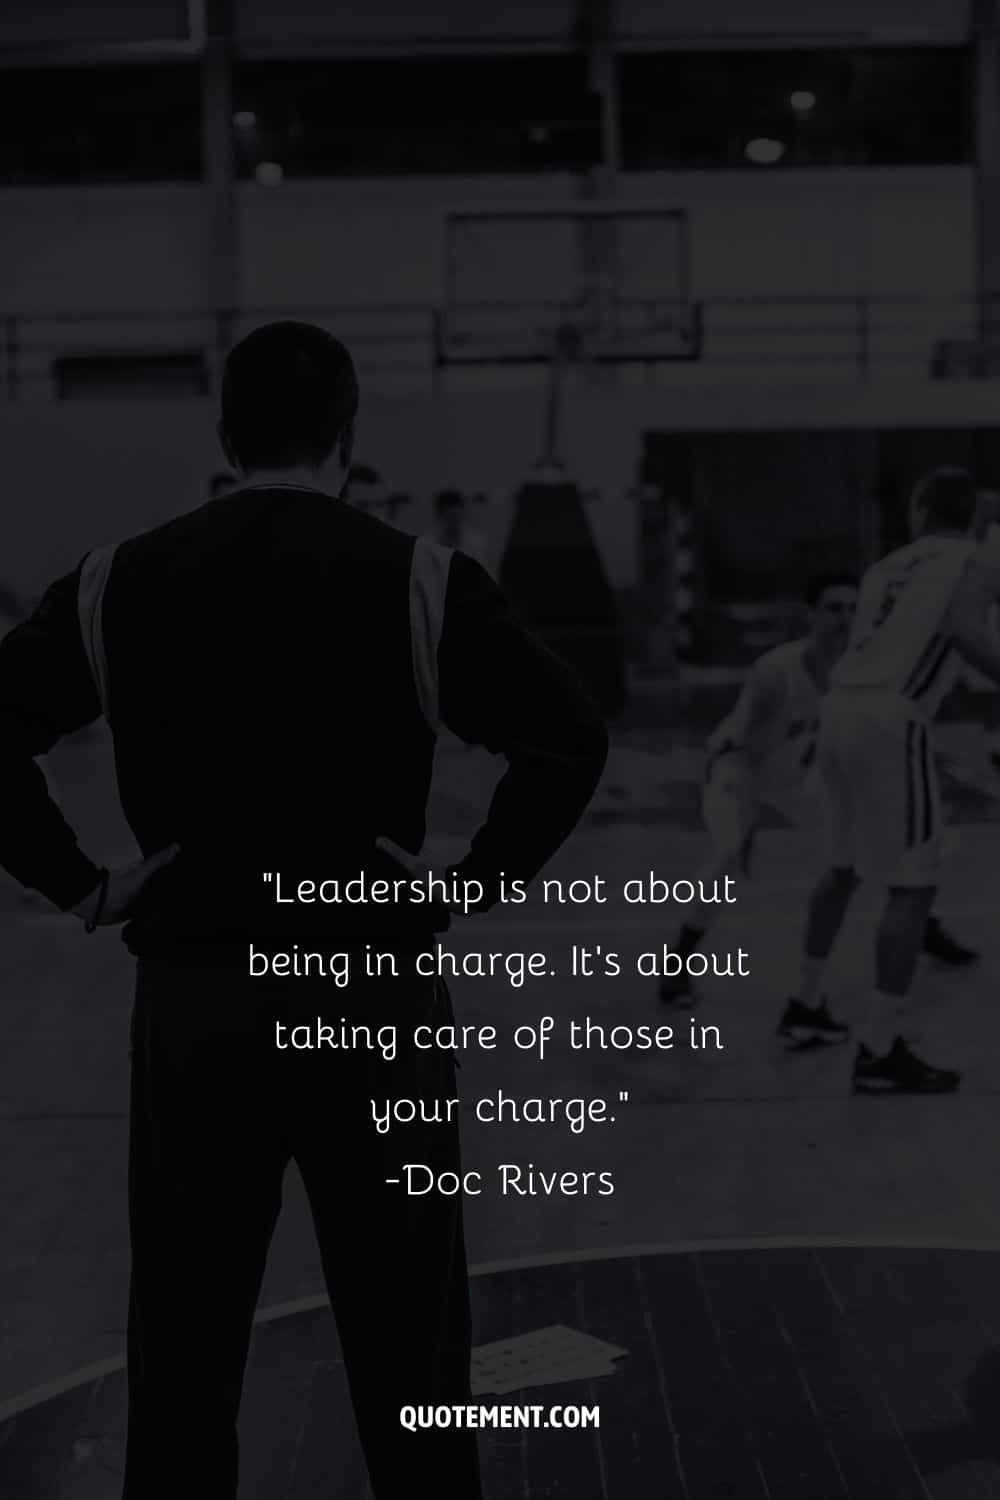 Leadership is not about being in charge. It's about taking care of those in your charge